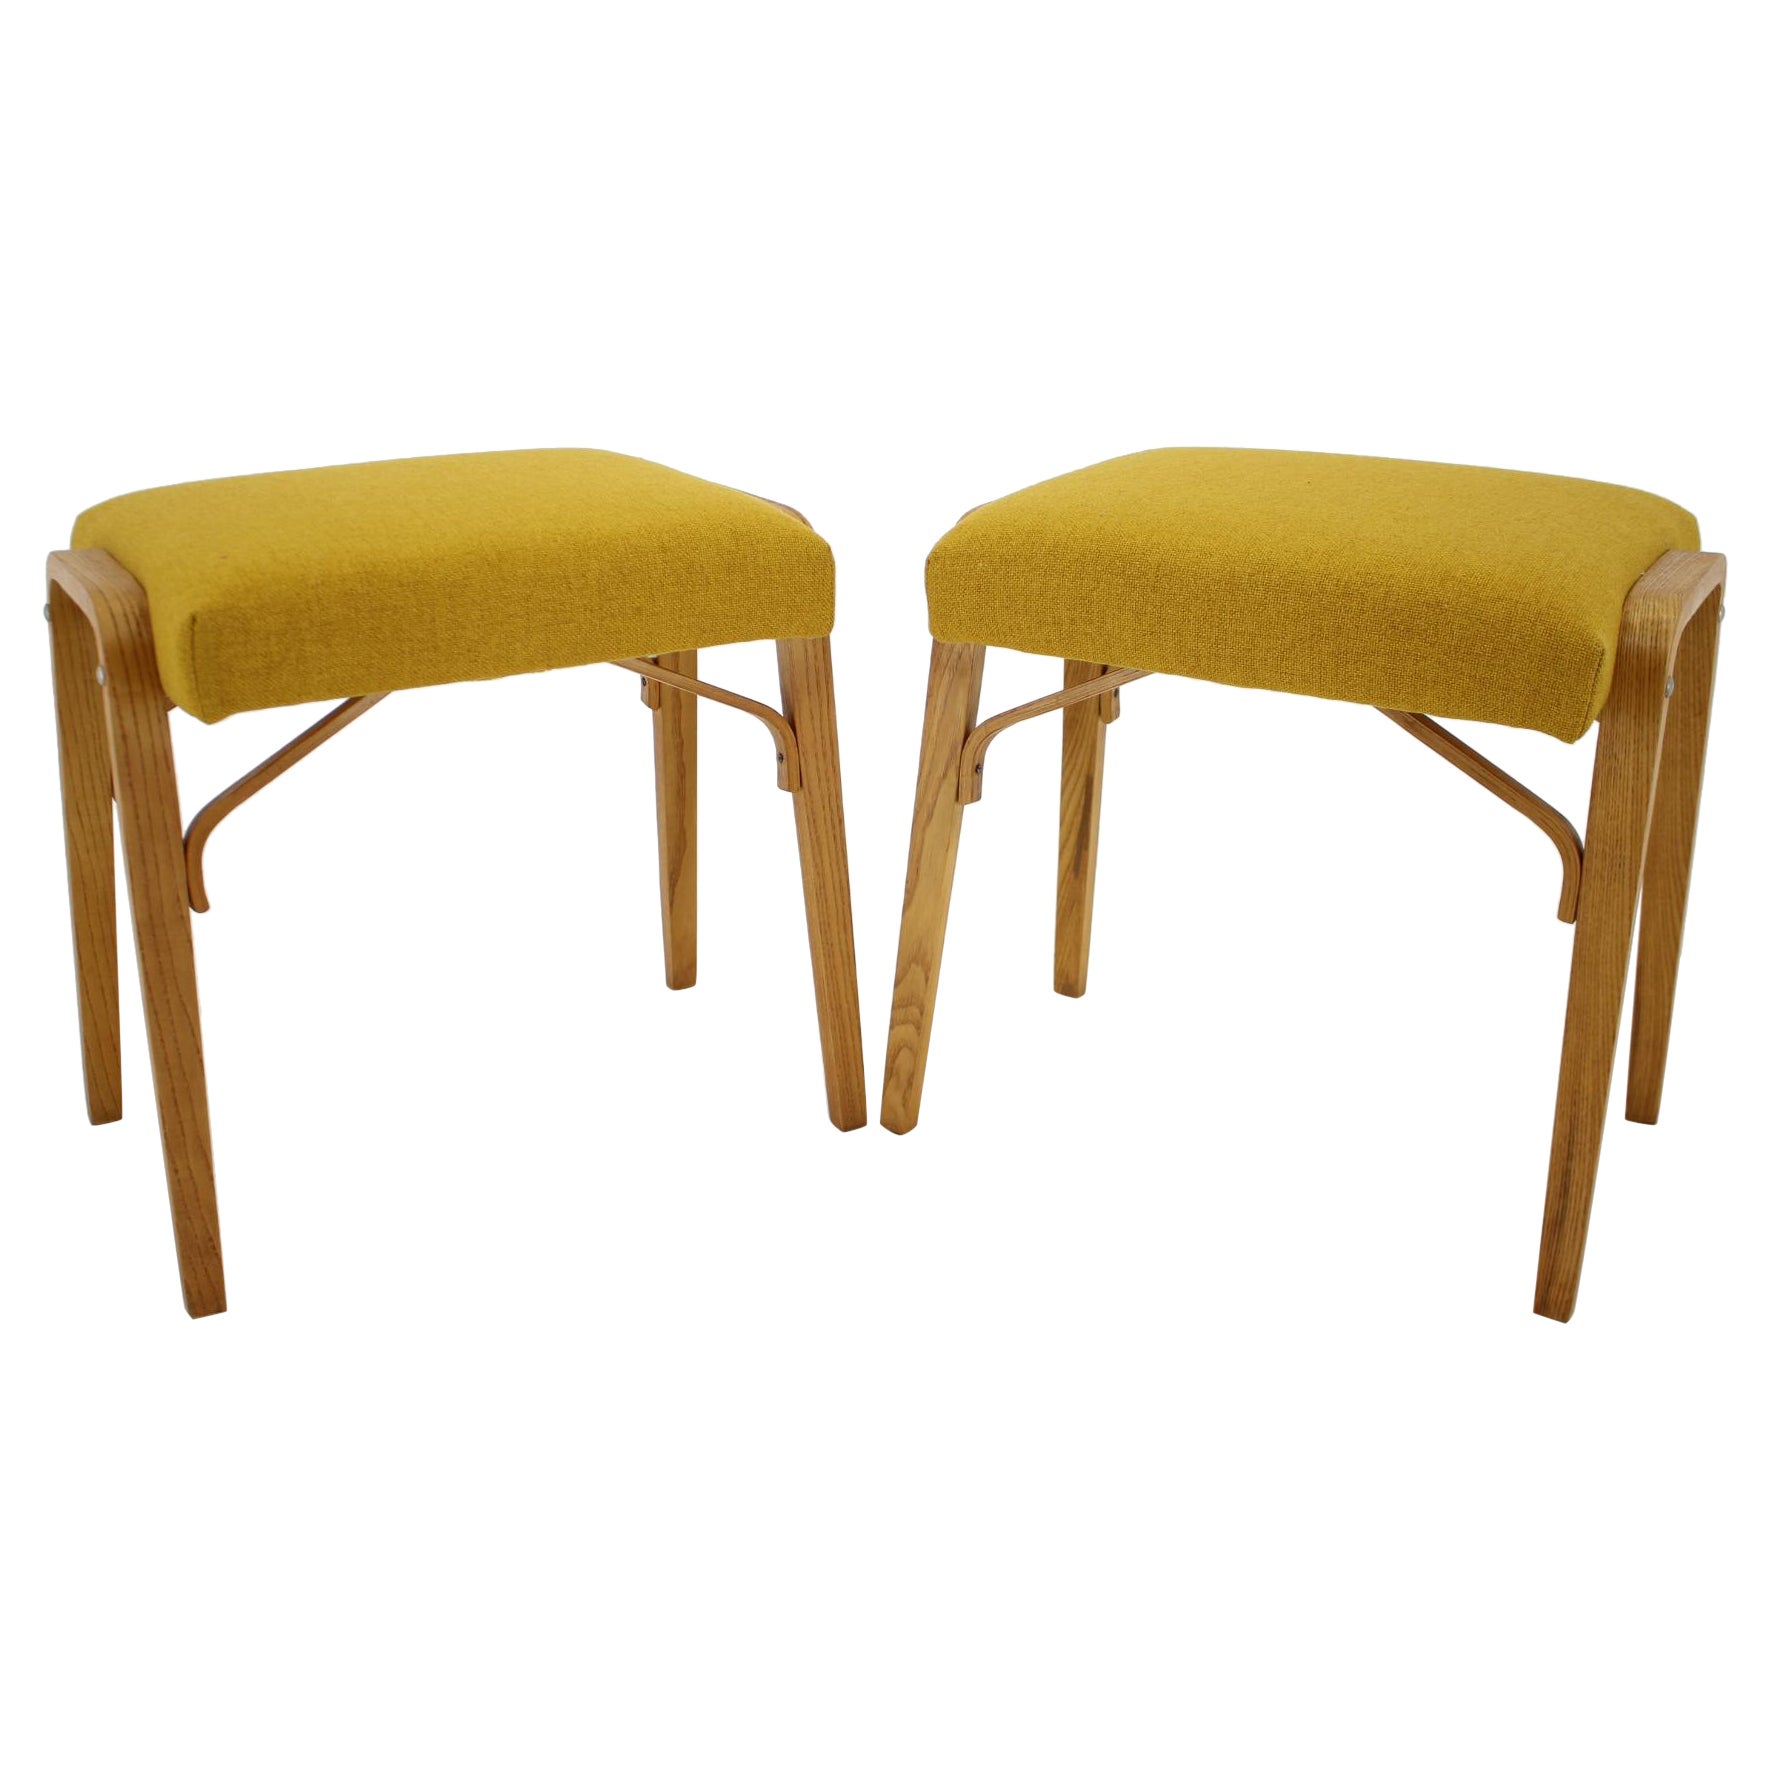 1960s Pair of Wooden Stools, Czechoslovakia For Sale